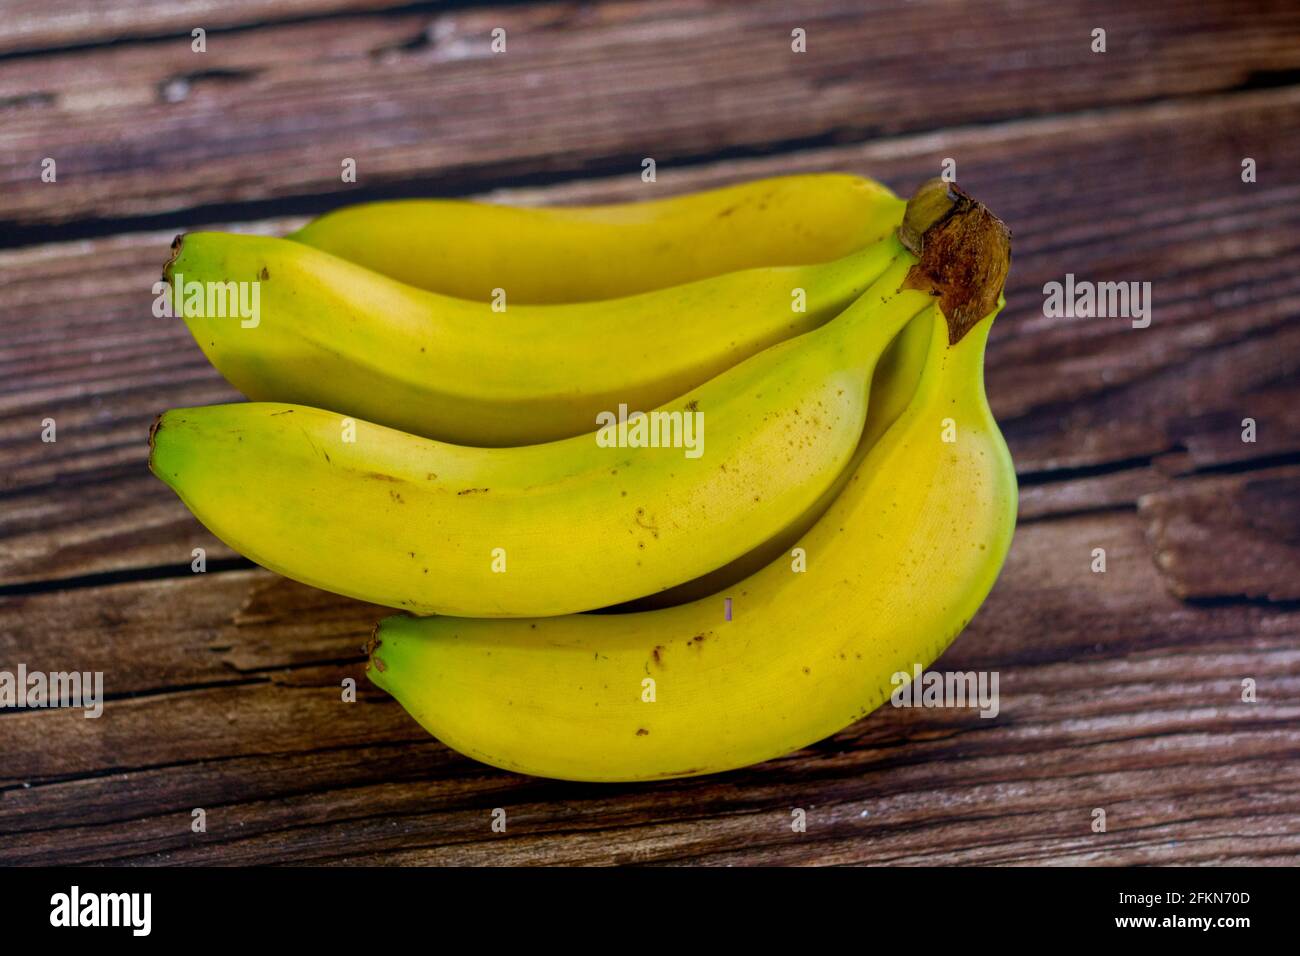 https://c8.alamy.com/comp/2FKN70D/canarian-bananas-on-a-wooden-table-variety-of-bananas-grown-in-the-canary-islands-in-spain-2FKN70D.jpg